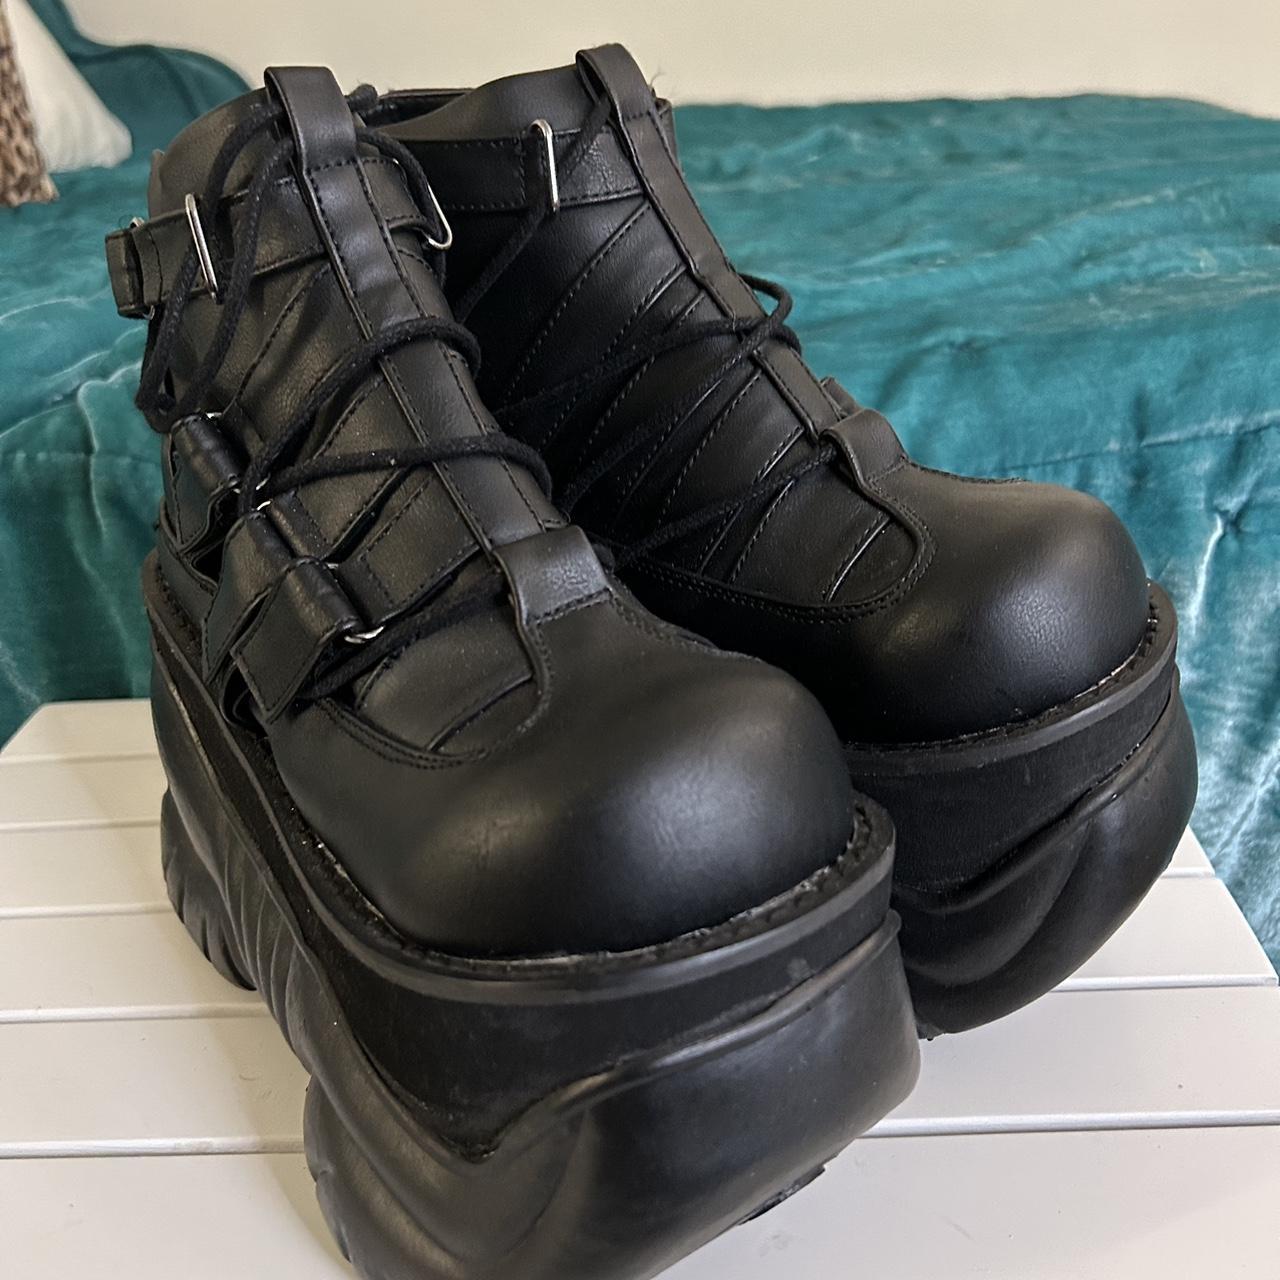 Demonia BOXER-13 Ankle boot W5 (barely worn!) - Depop